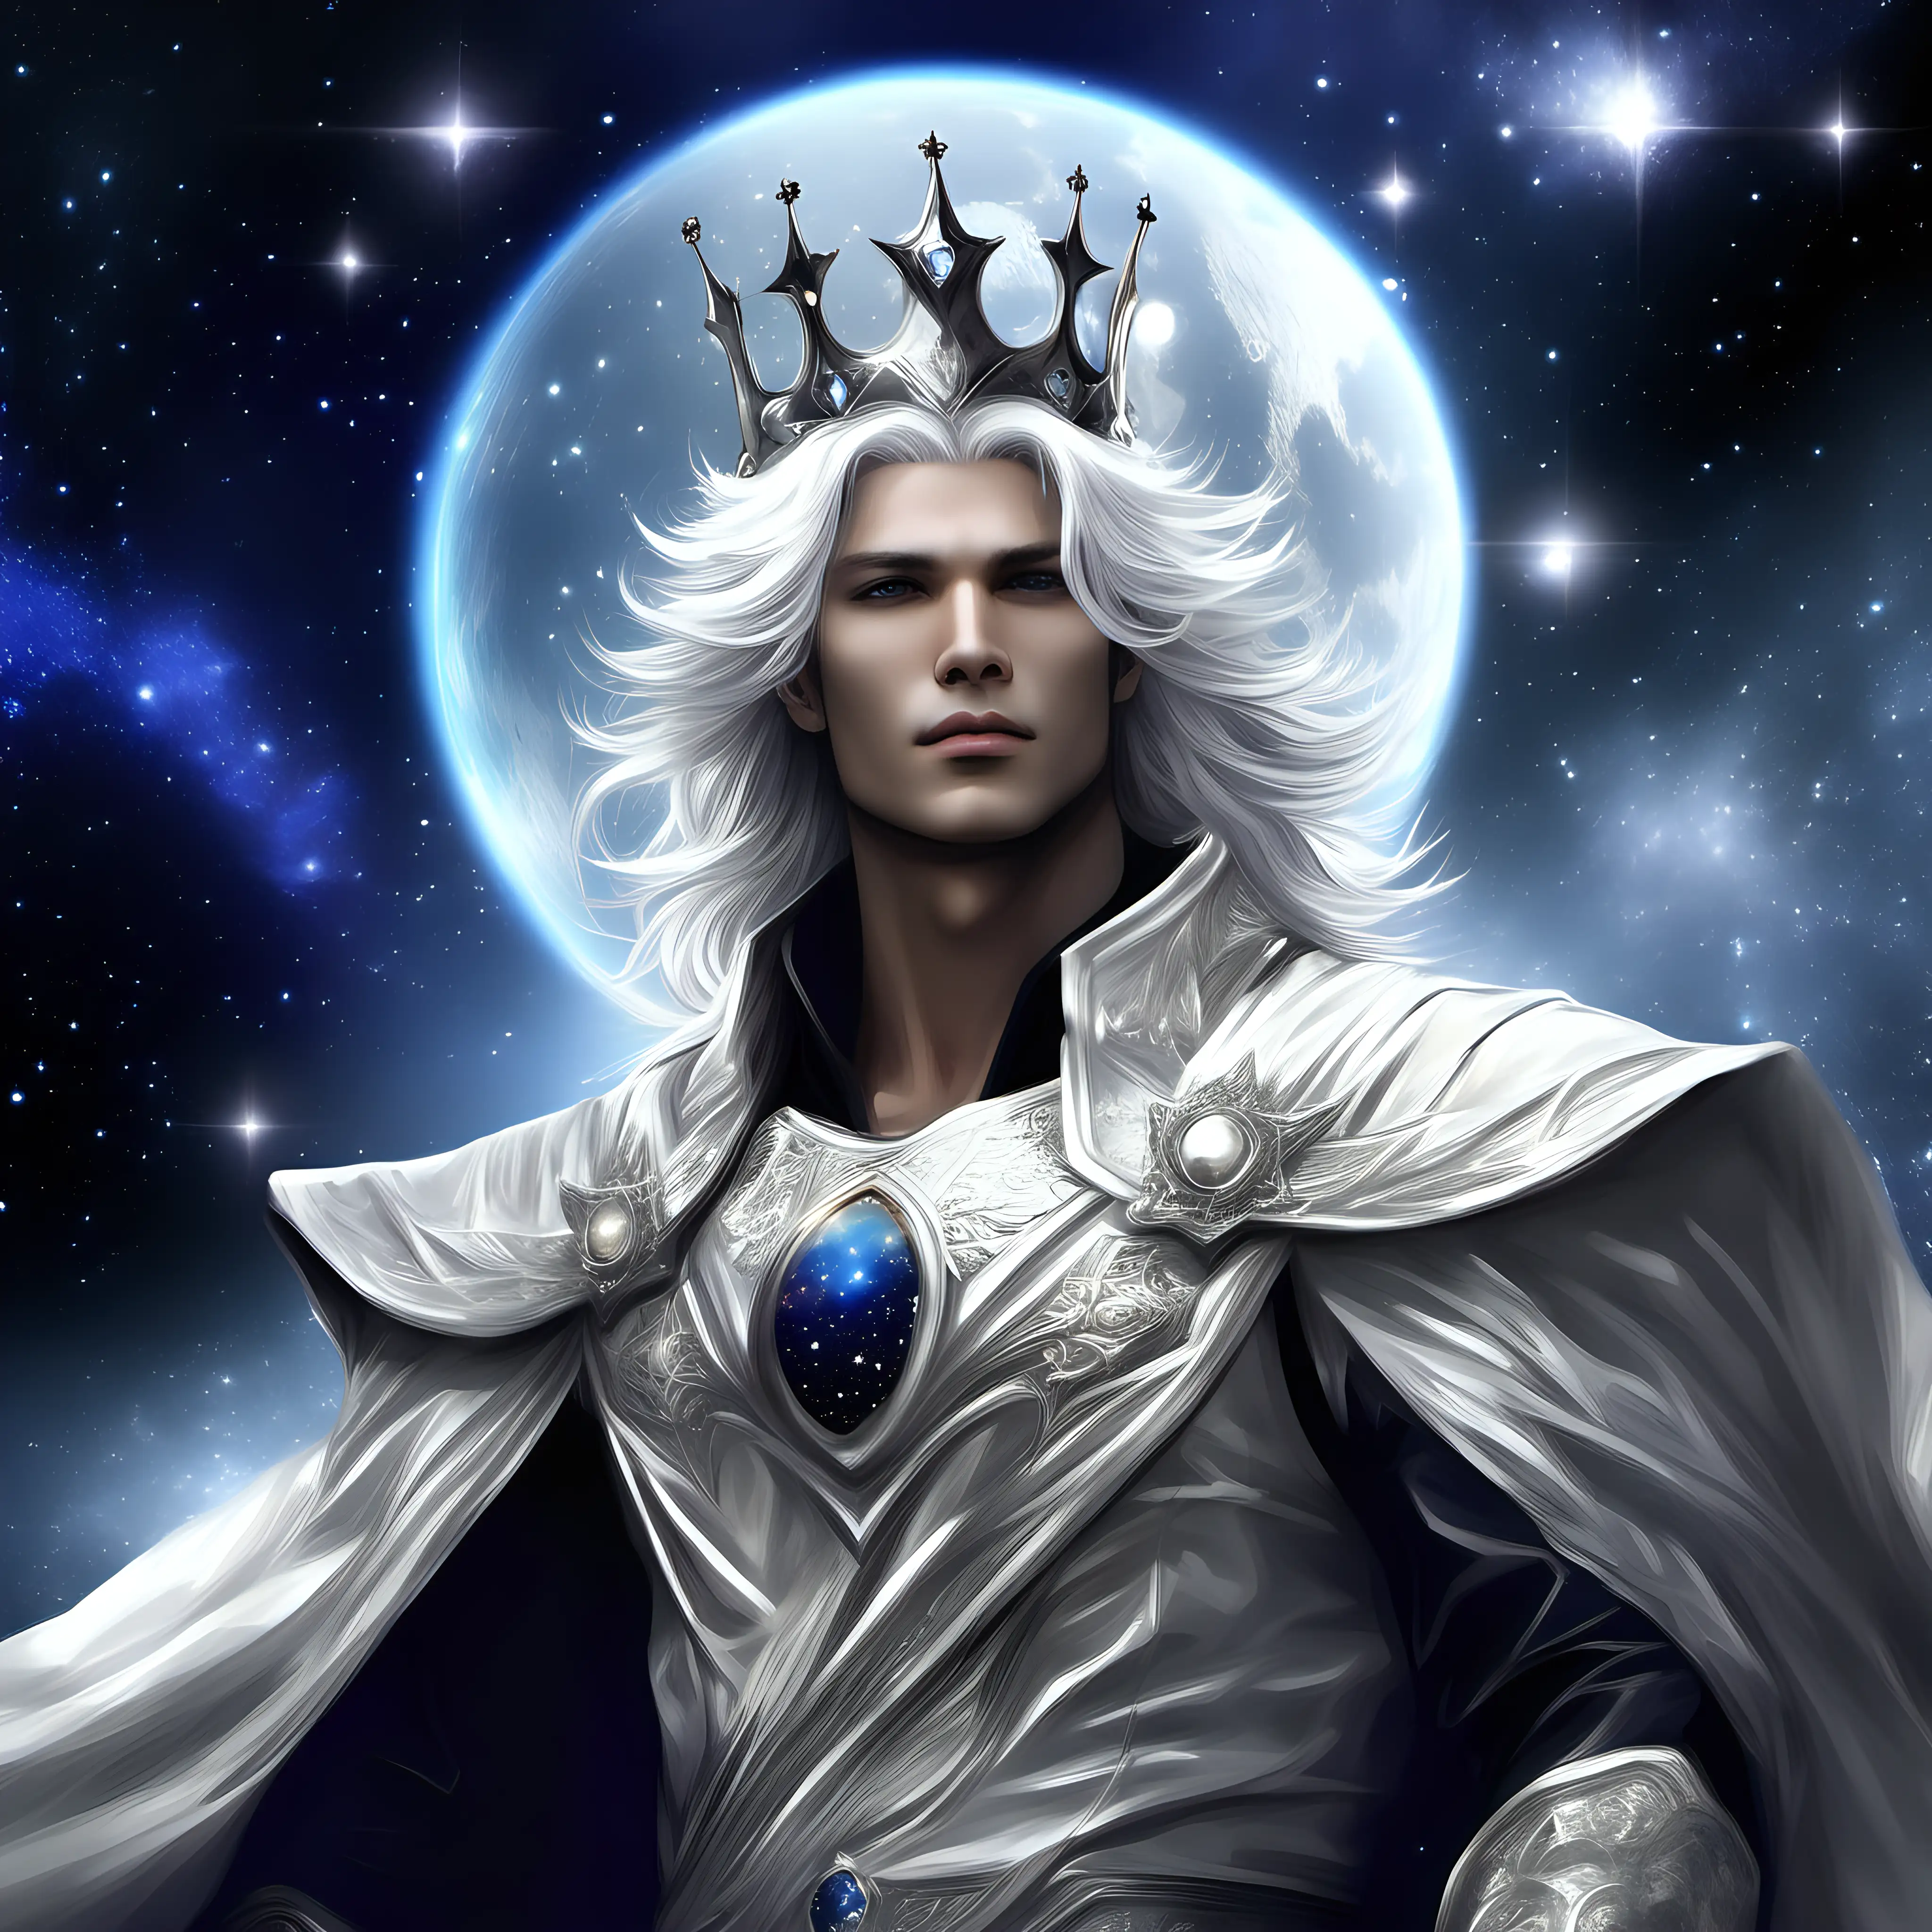 a powerful celestial being, crown prince, galaxy themed, crown of stars, cosmic, nebula, strong male, beautiful prince, mysterious, glalaxian prince, white hair, silvery skin, moon, photo realism